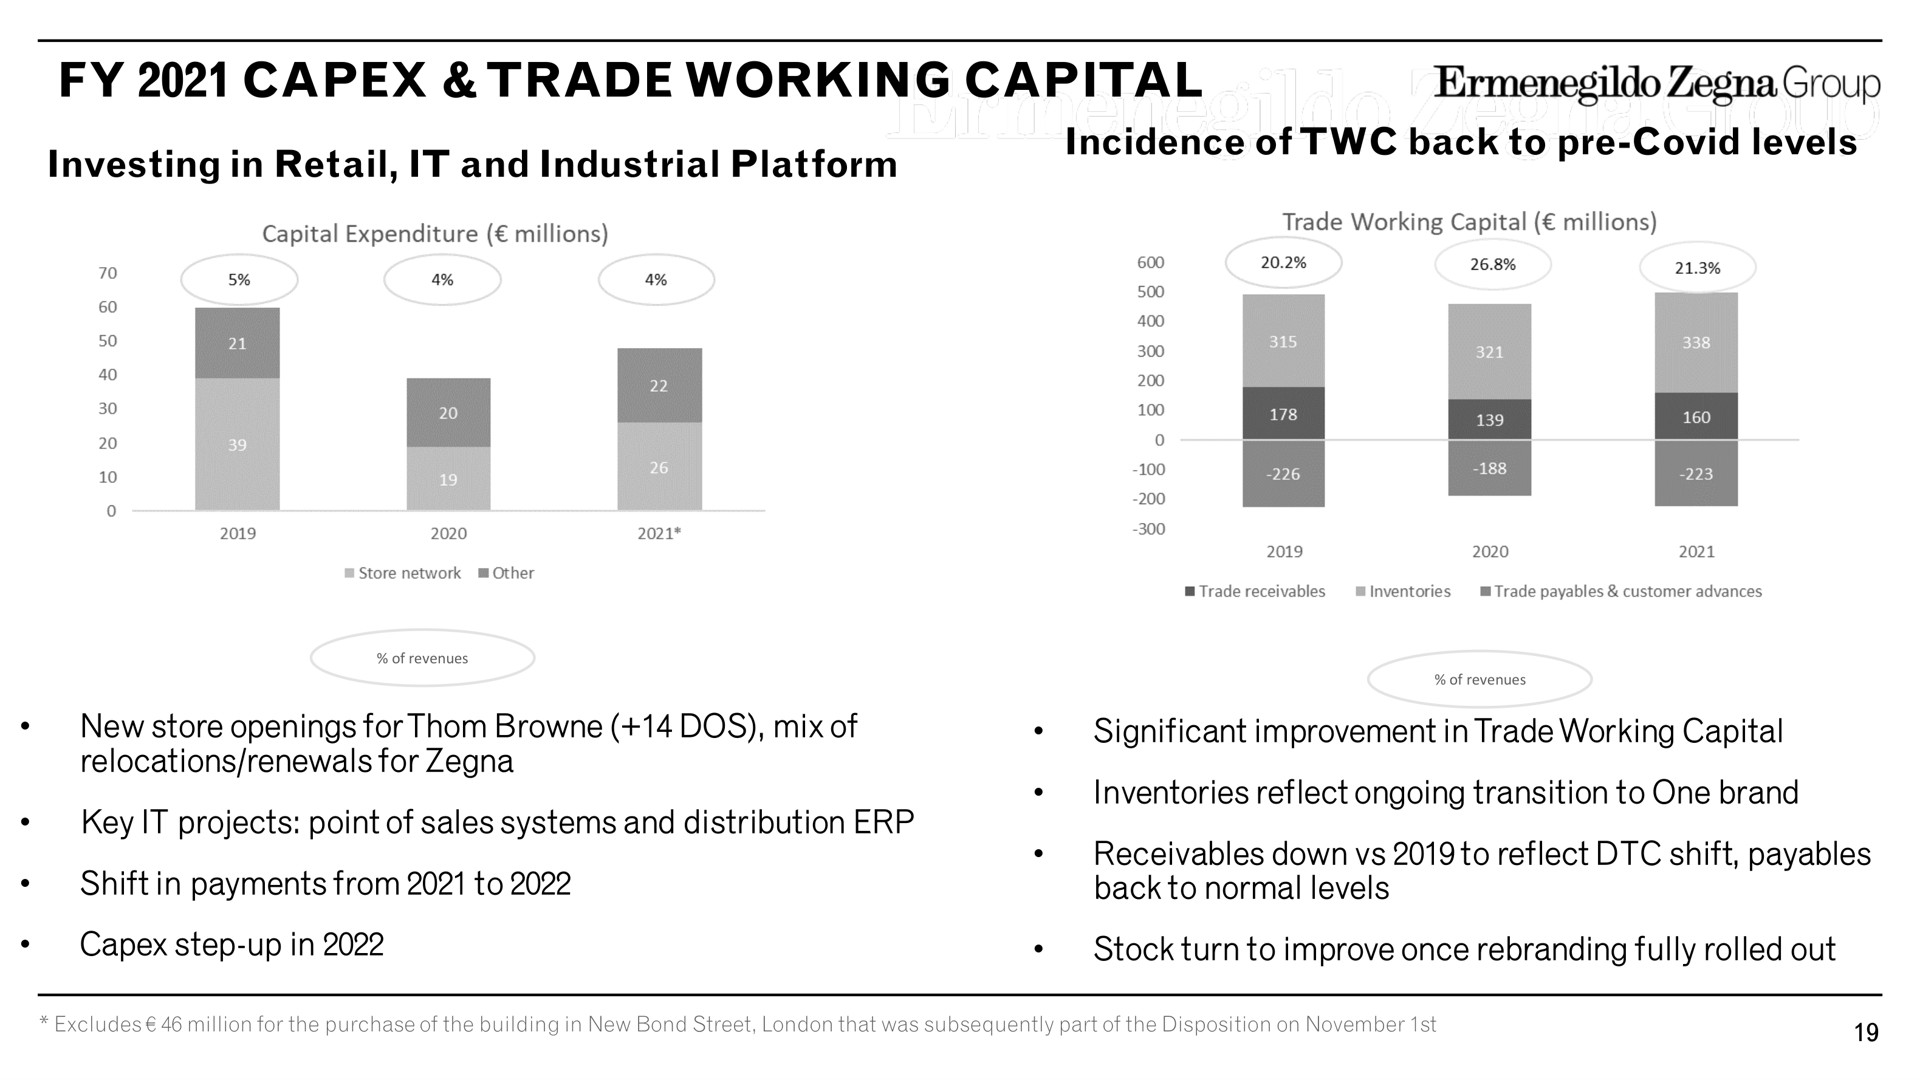 trade working capital investing in retail it and industrial platform incidence of back to covid levels group a | Zegna